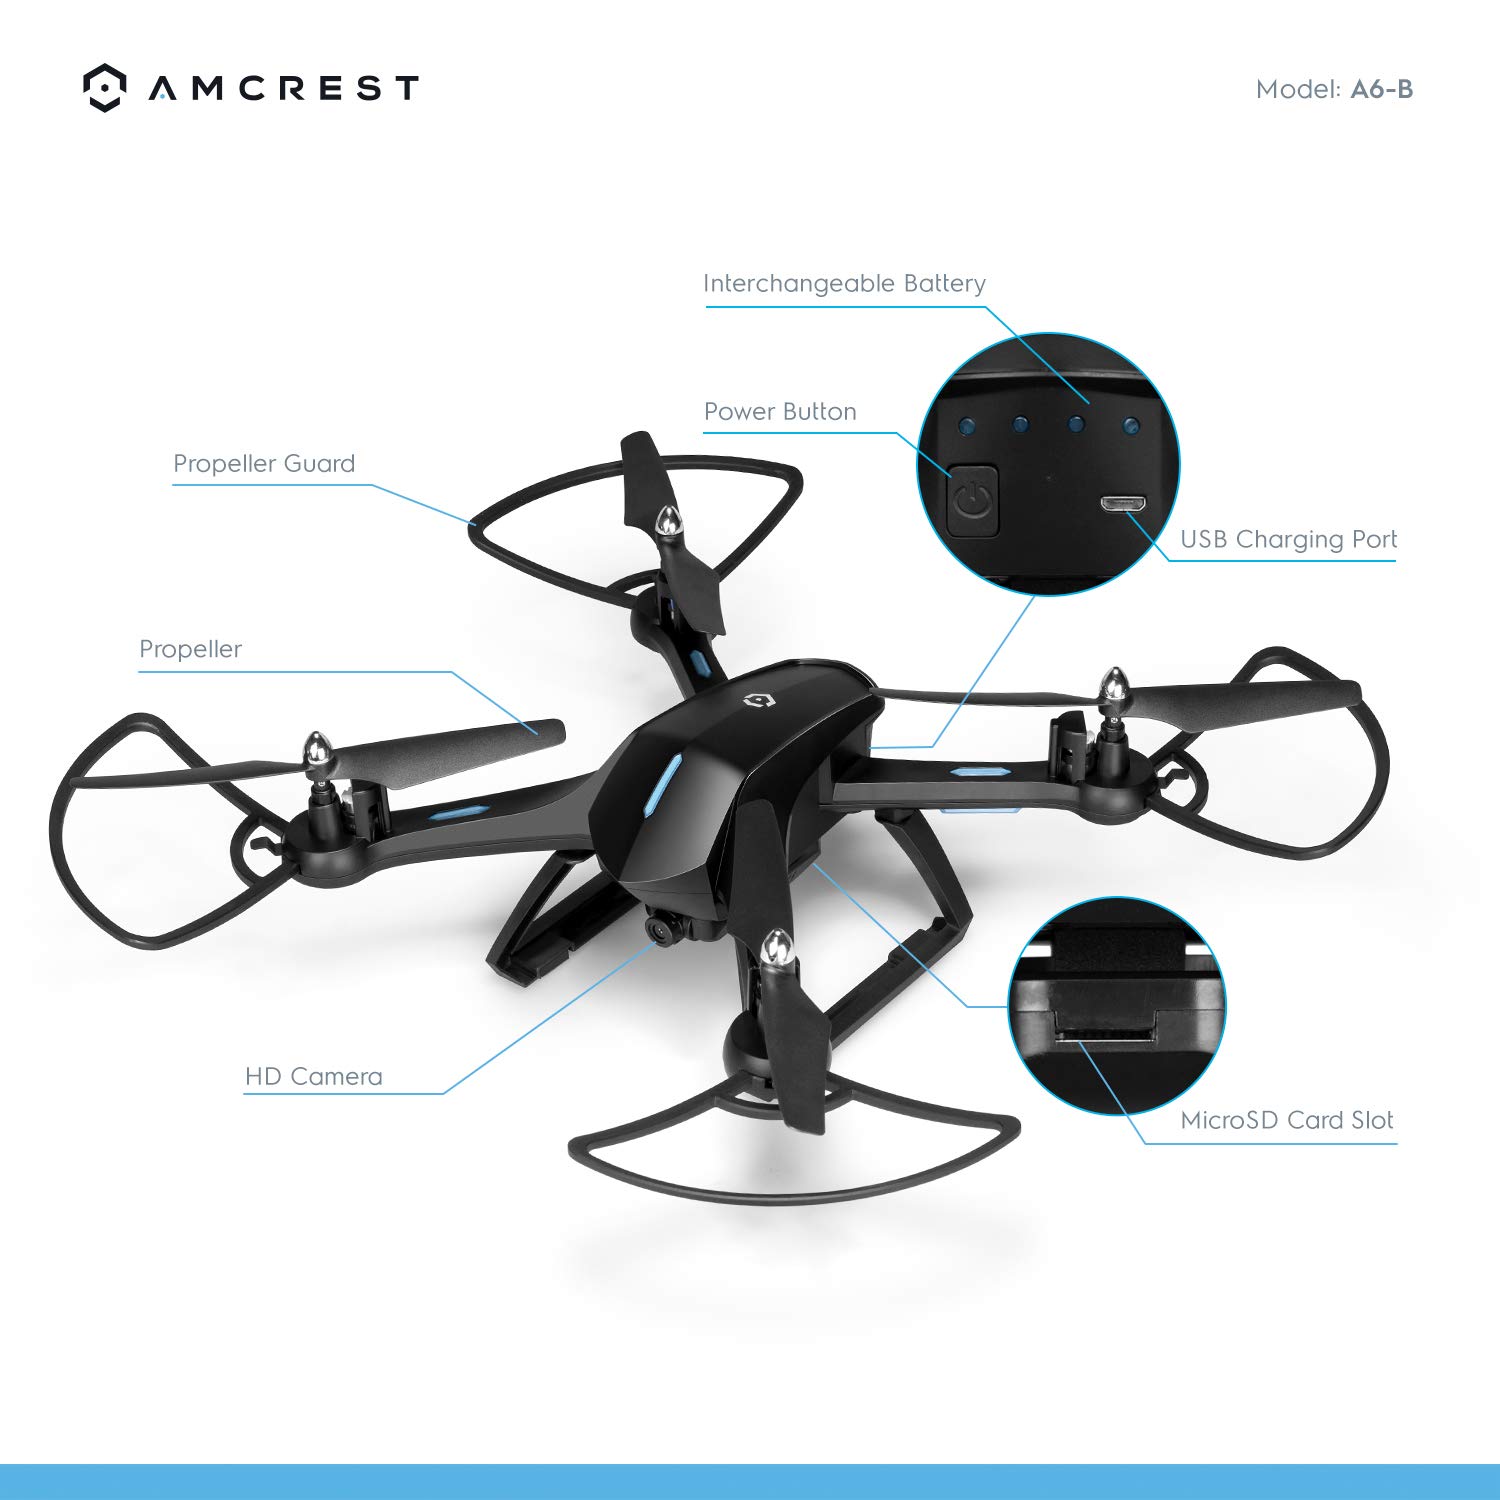 Amcrest A6-B Skyview Pro WiFi Drone with Camera HD 1.3MP FPV Quadcopter, RC + 2.4ghz WiFi Helicopter w/Remote Control, Headless Mode, Smartphone (Black) - image 4 of 6